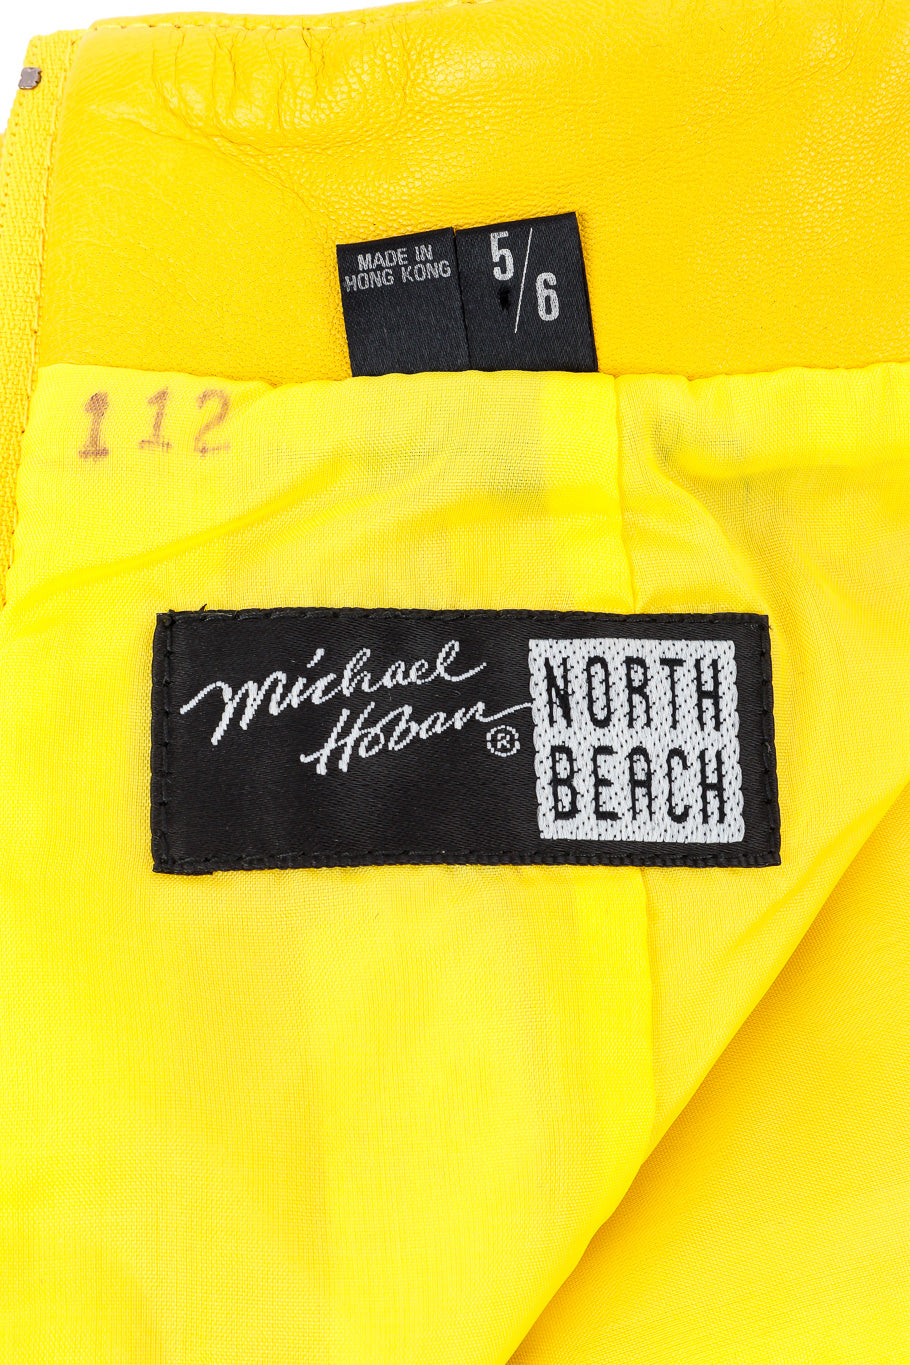 Vintage North Beach Cutout Leather Jacket and Skirt Set signature label in skirt closeup @Recessla